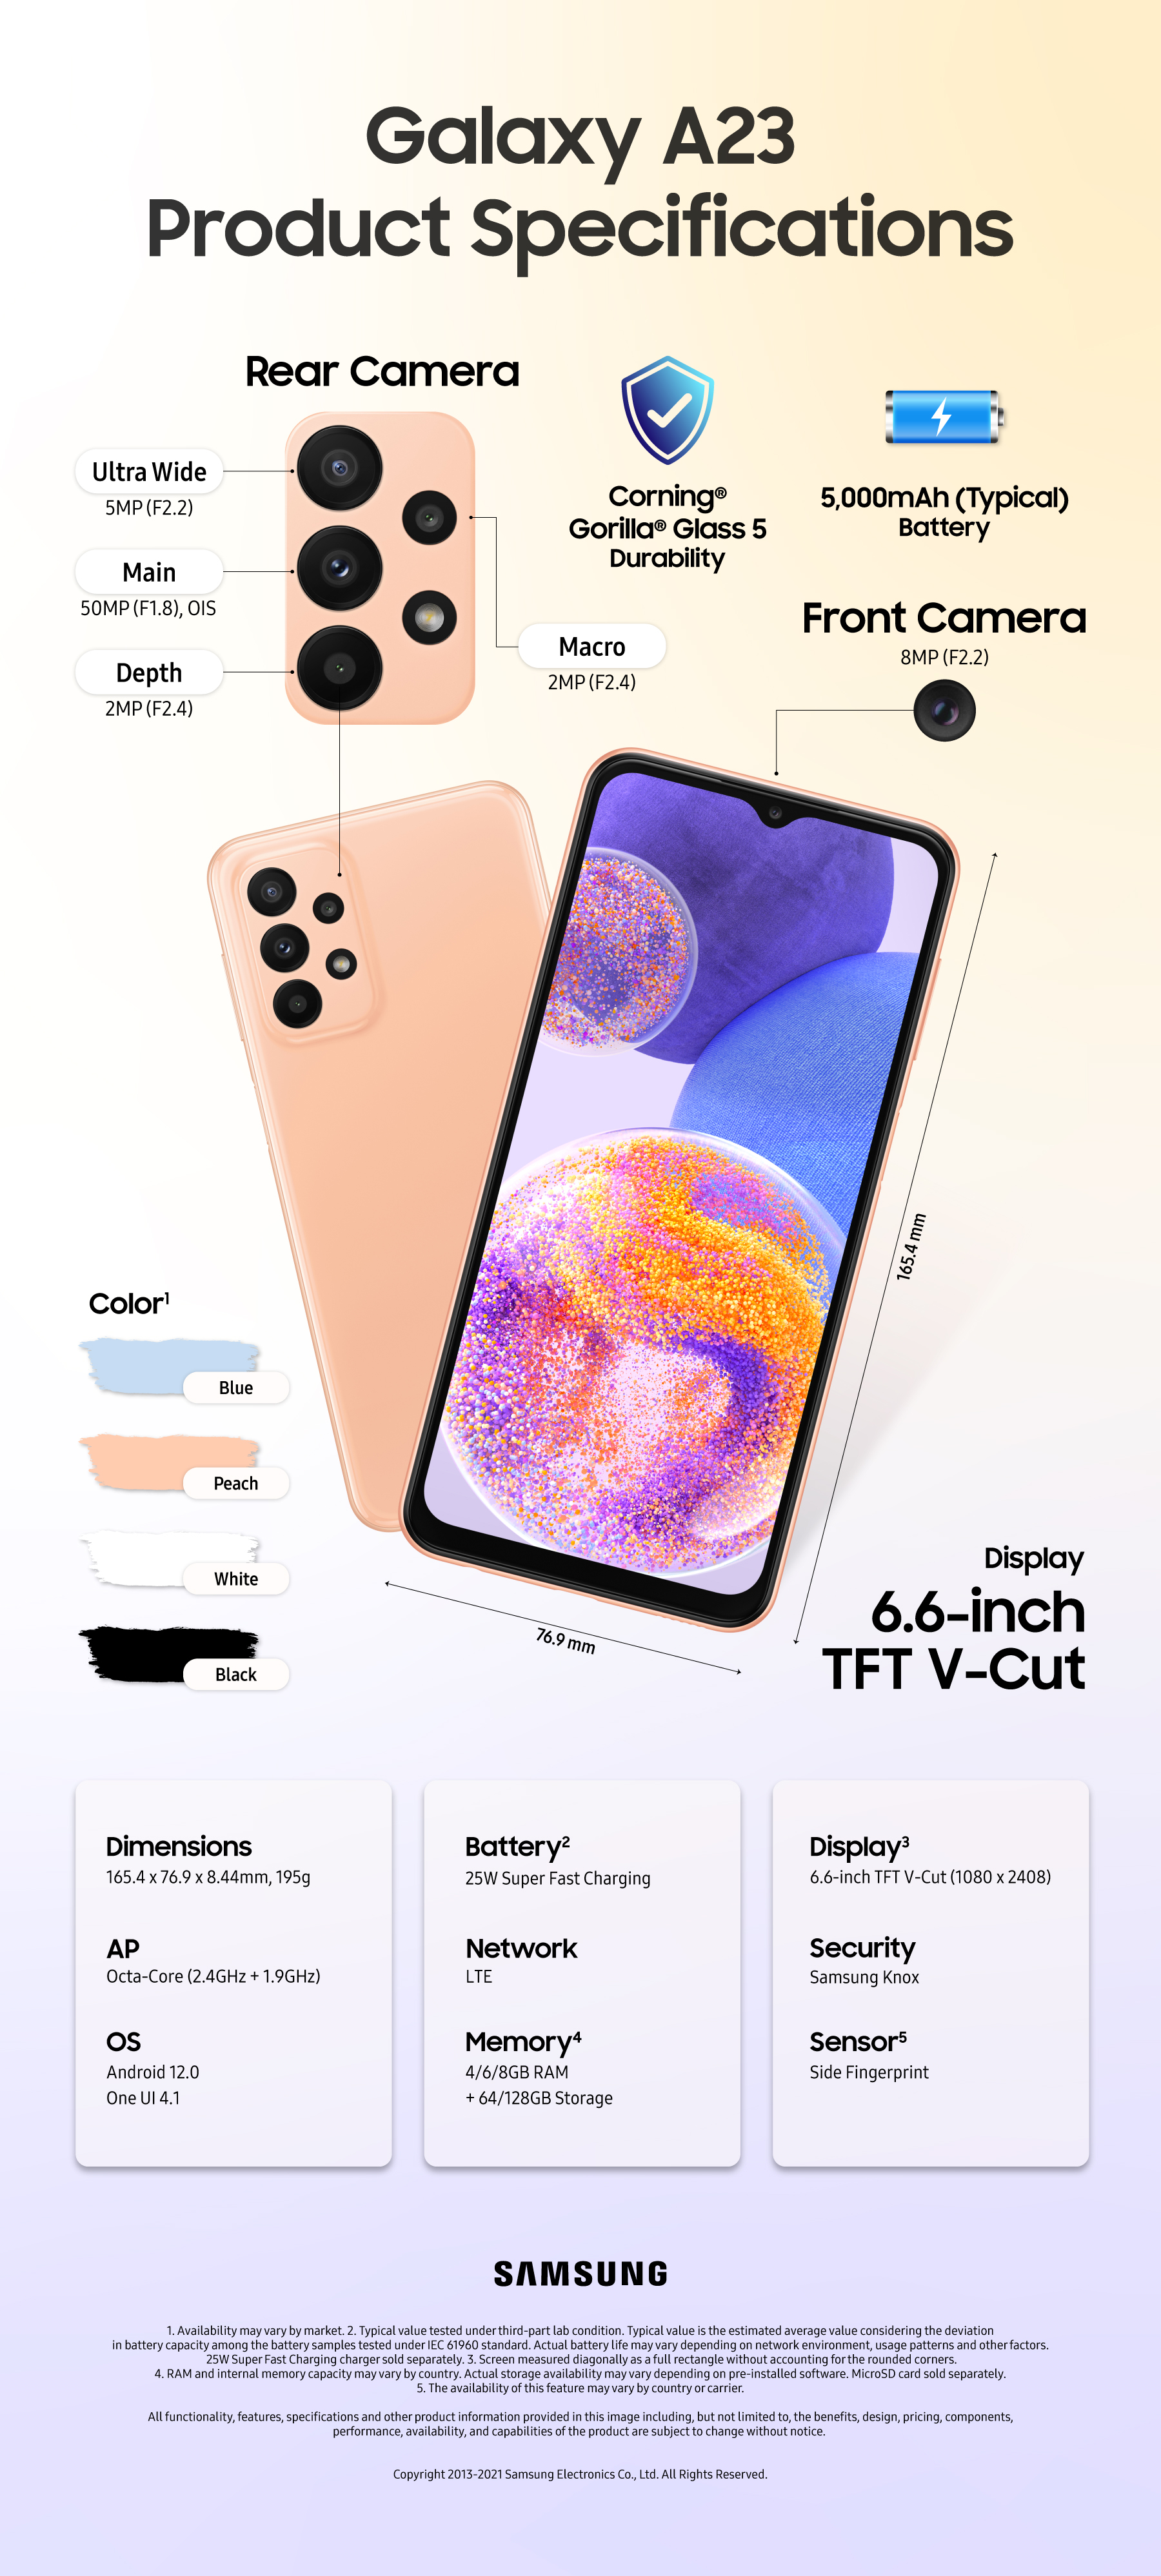 Infographic] Galaxy A23 Brings Users All the Galaxy Innovations